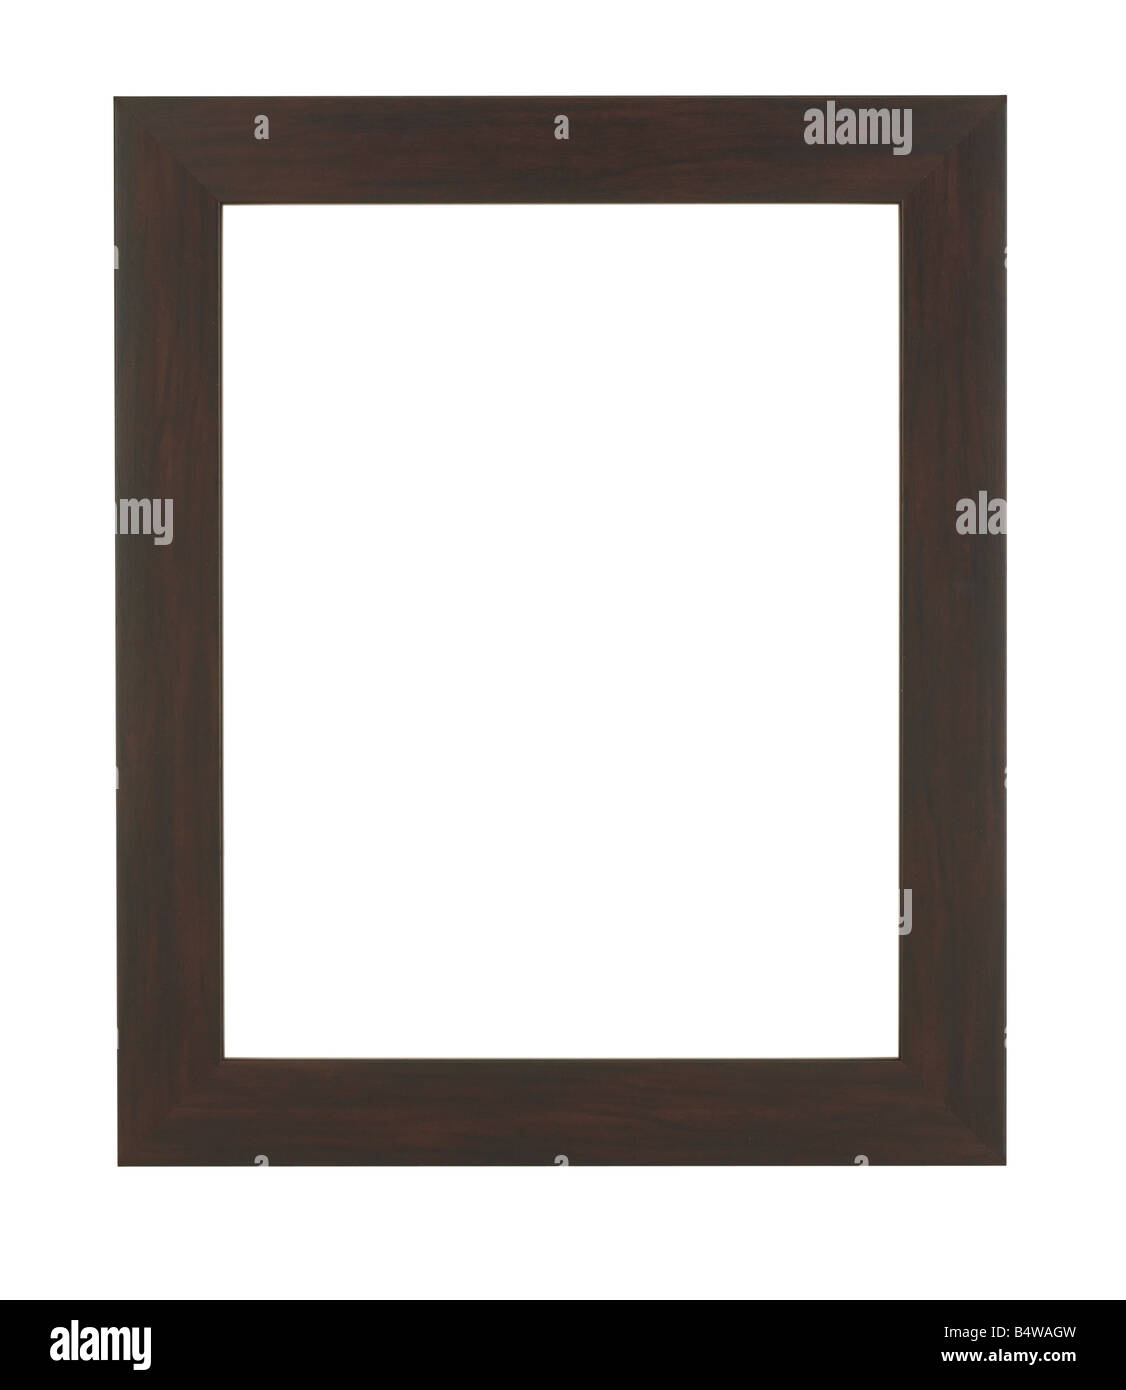 DARK BROWN WOOD PICTURE FRAME Stock Photo